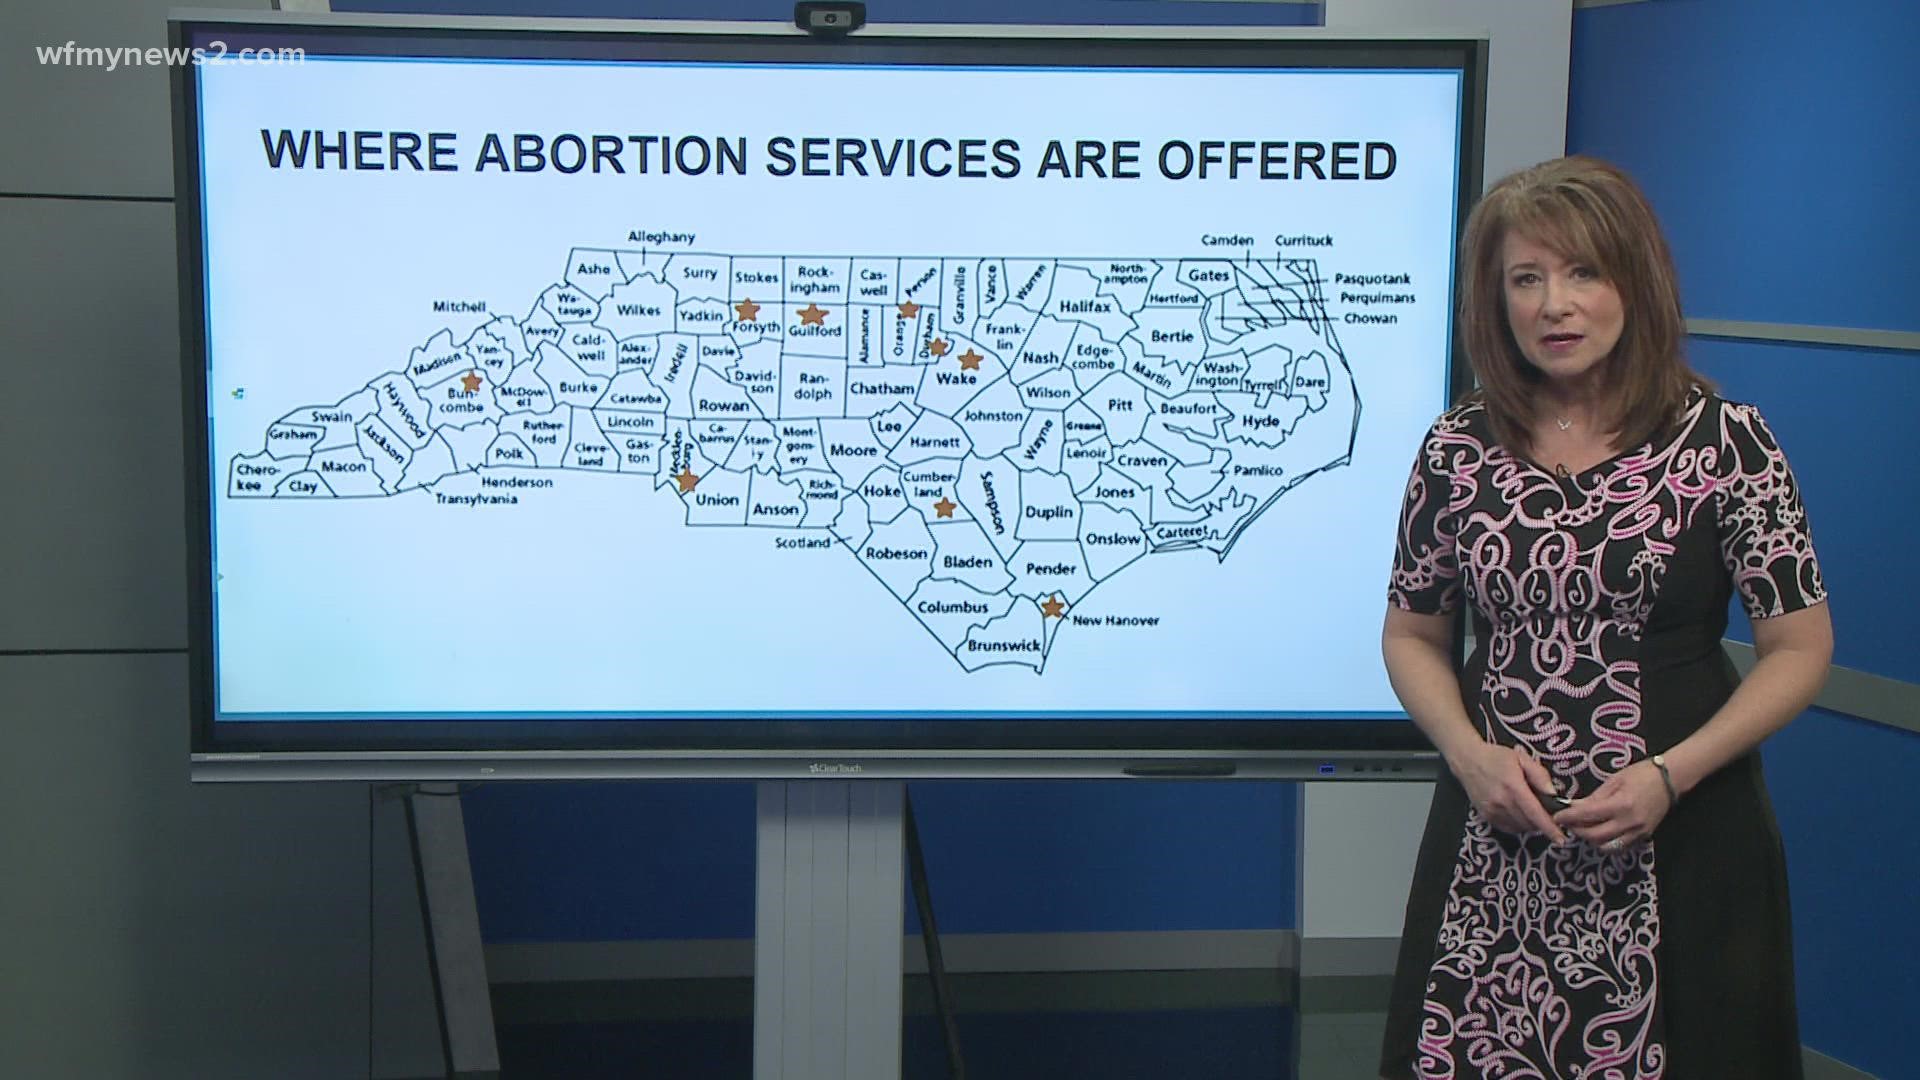 NC has 100 counties. Chances are, there isn't a clinic that offers abortion services in the one you live in.